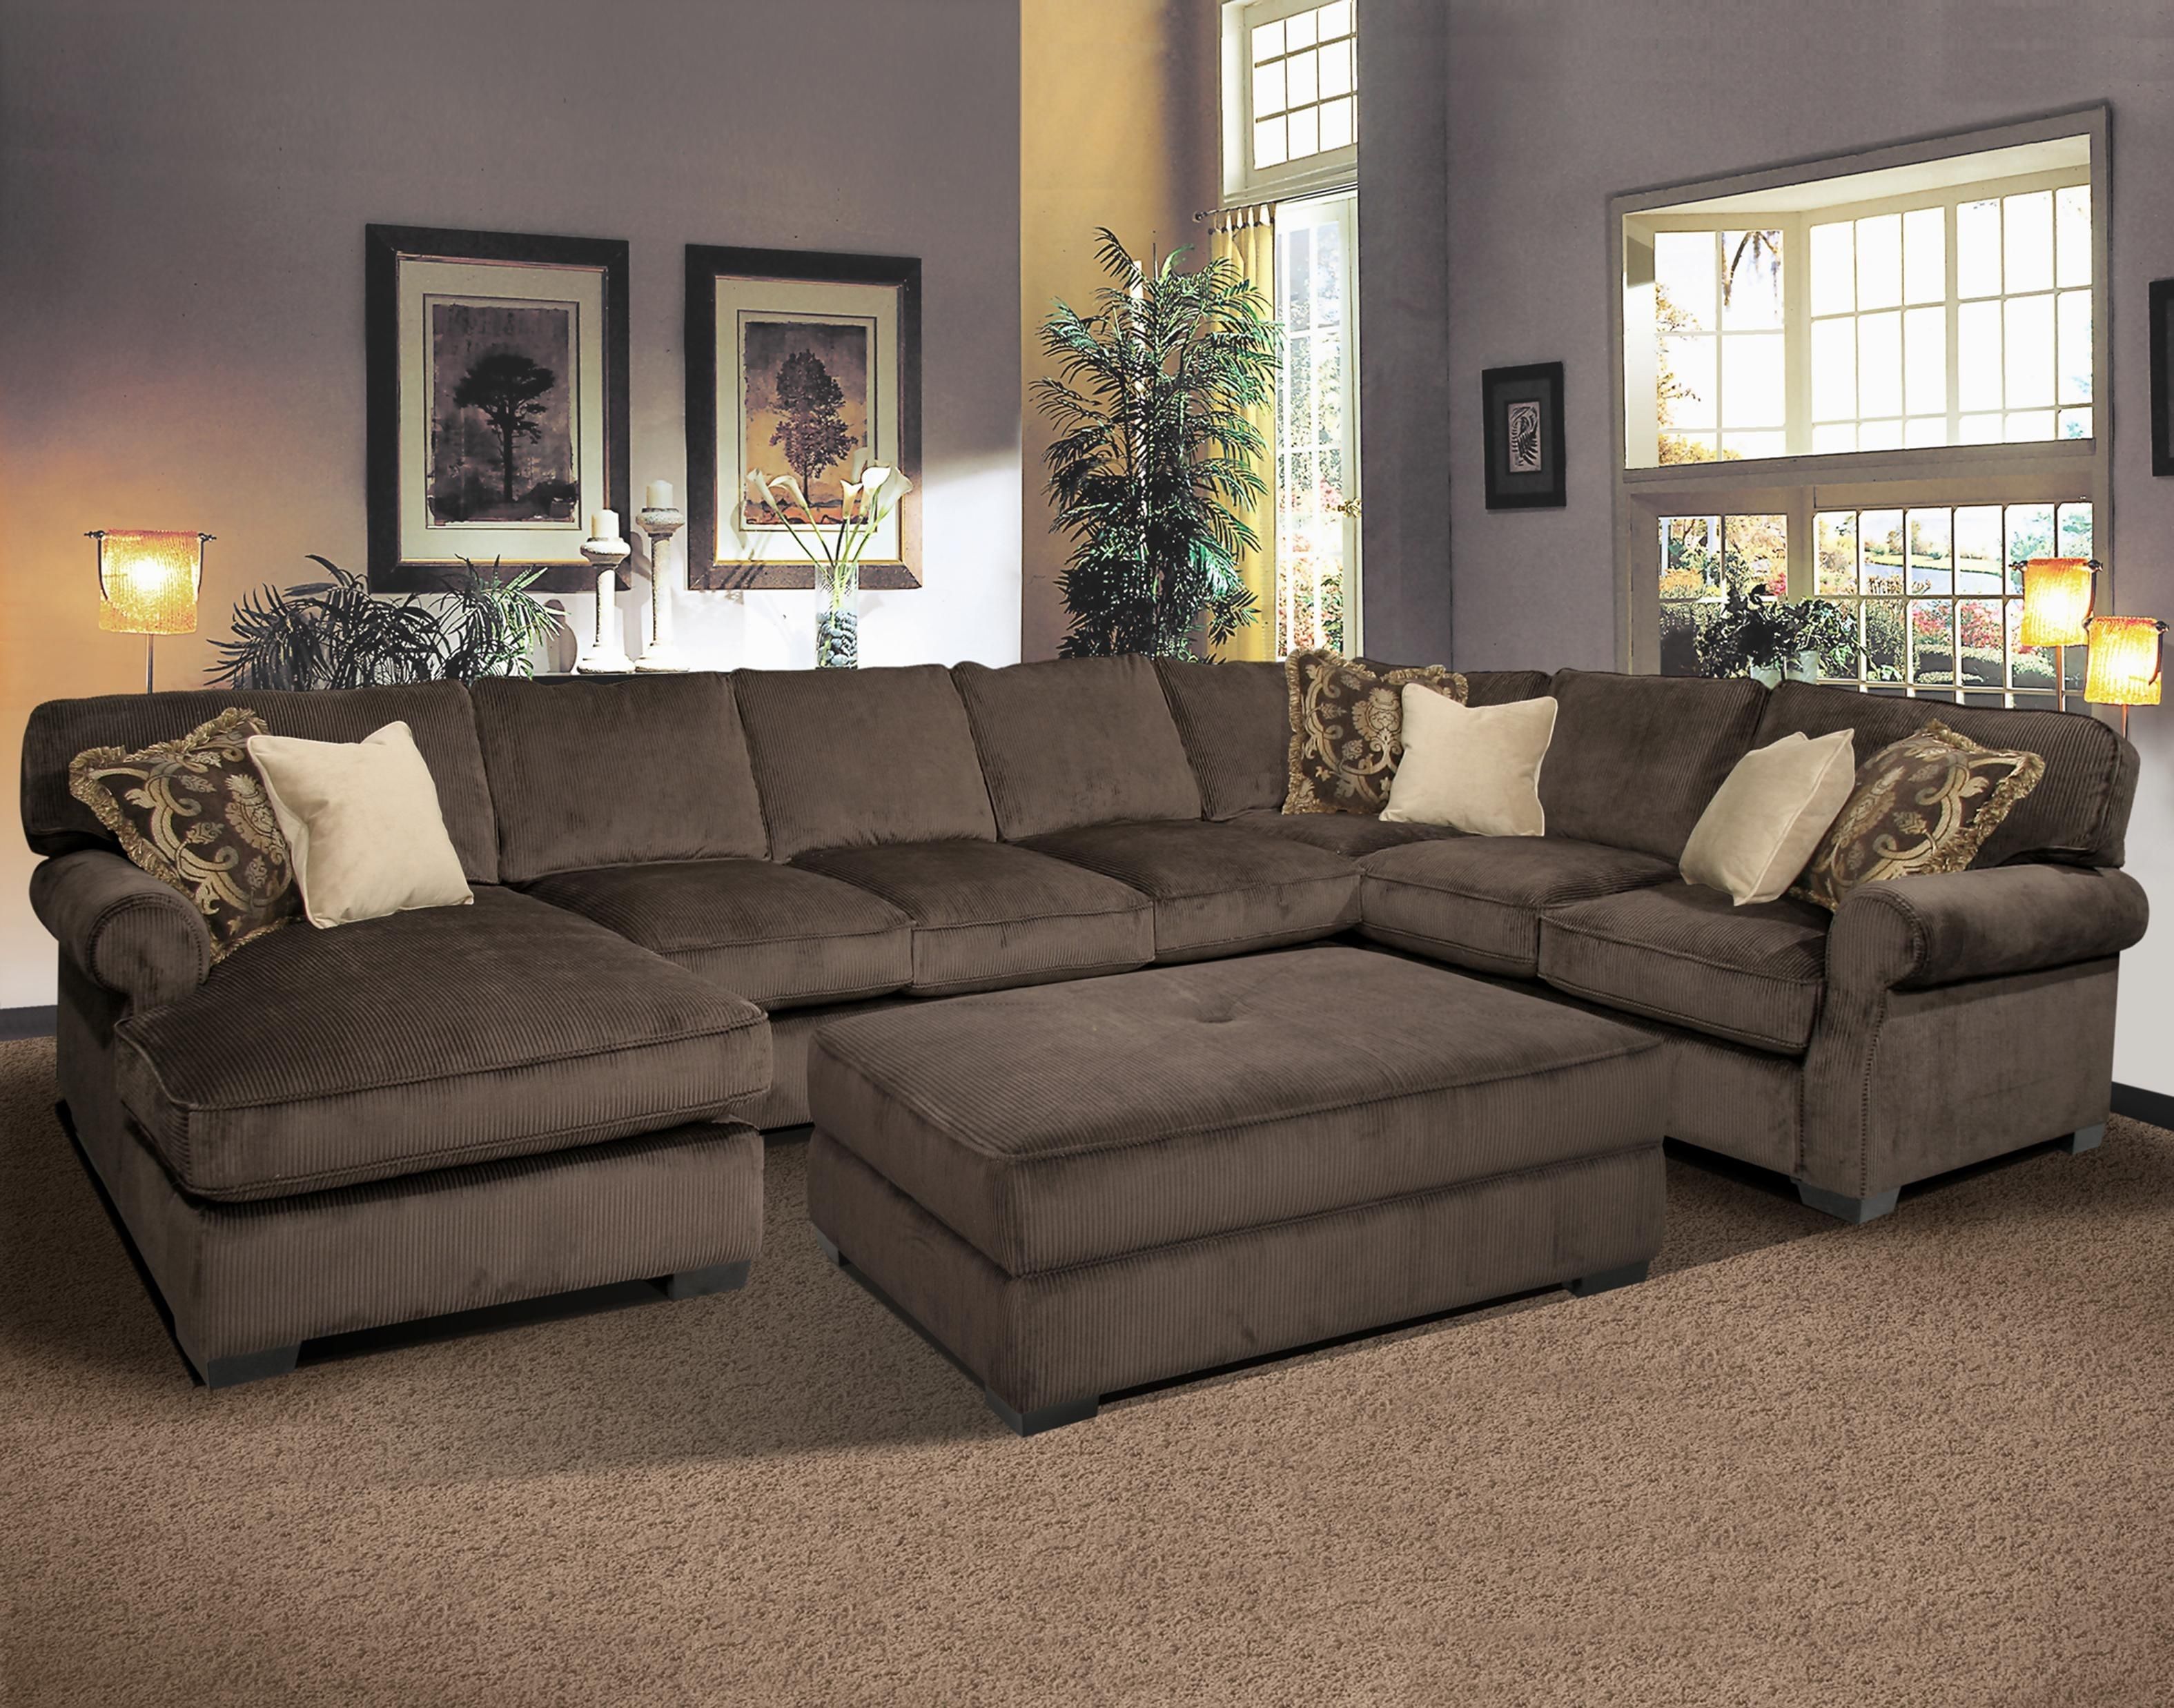 Grand Island Oversized Cocktail Ottoman For Sectional Sofa Inside Oversized Sectional Sofas 